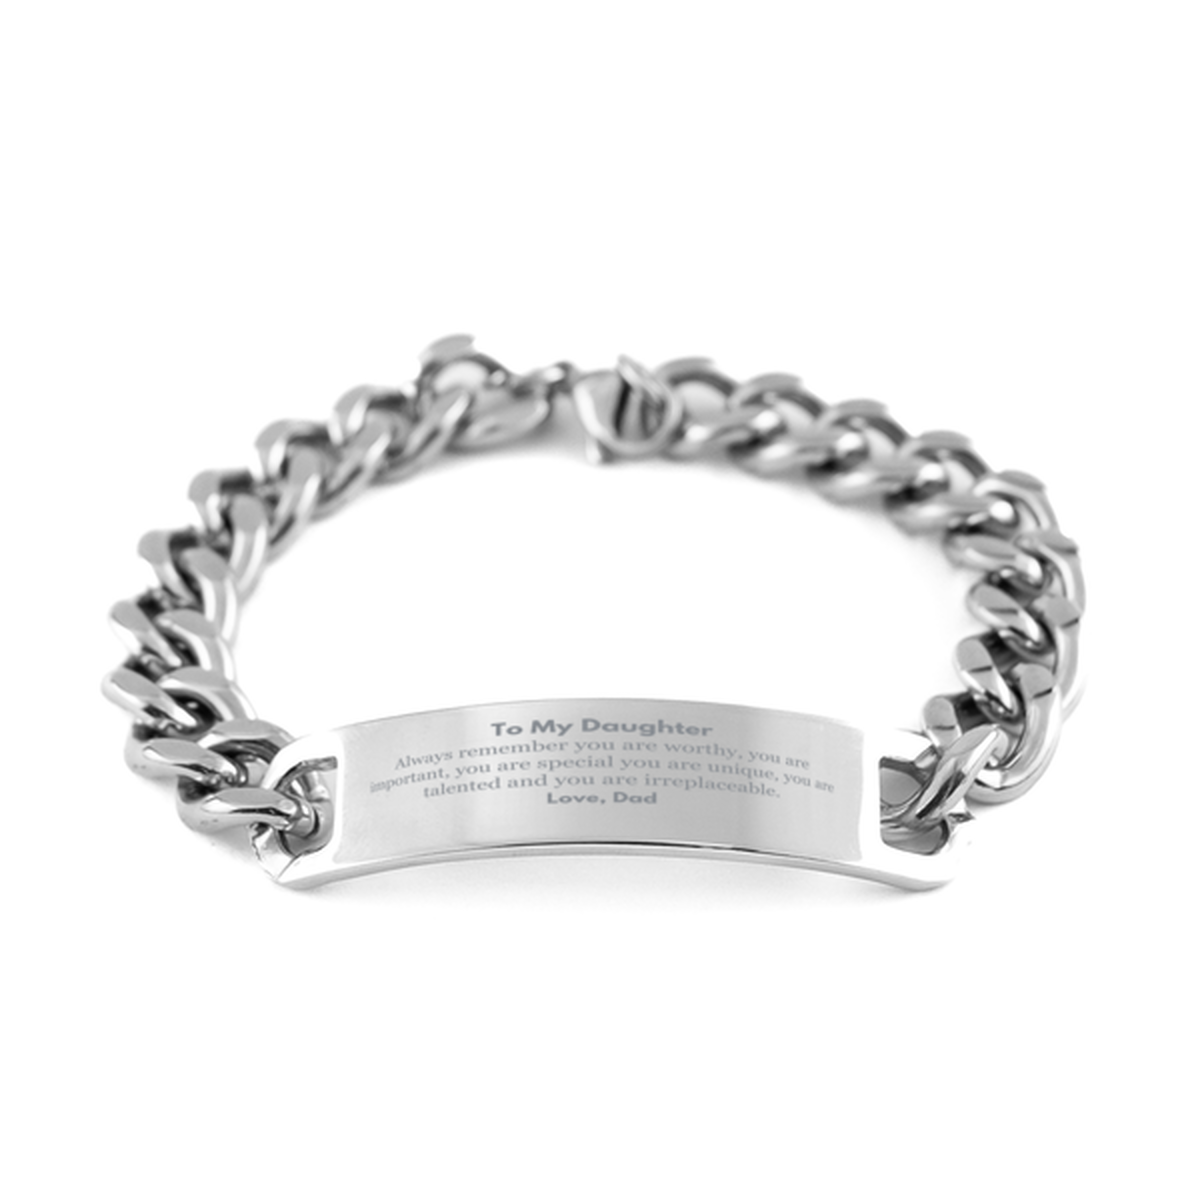 Daughter Birthday Gifts from Dad, Inspirational Cuban Chain Stainless Steel Bracelet for Daughter Christmas Graduation Gifts for Daughter Always remember you are worthy, you are important. Love, Dad